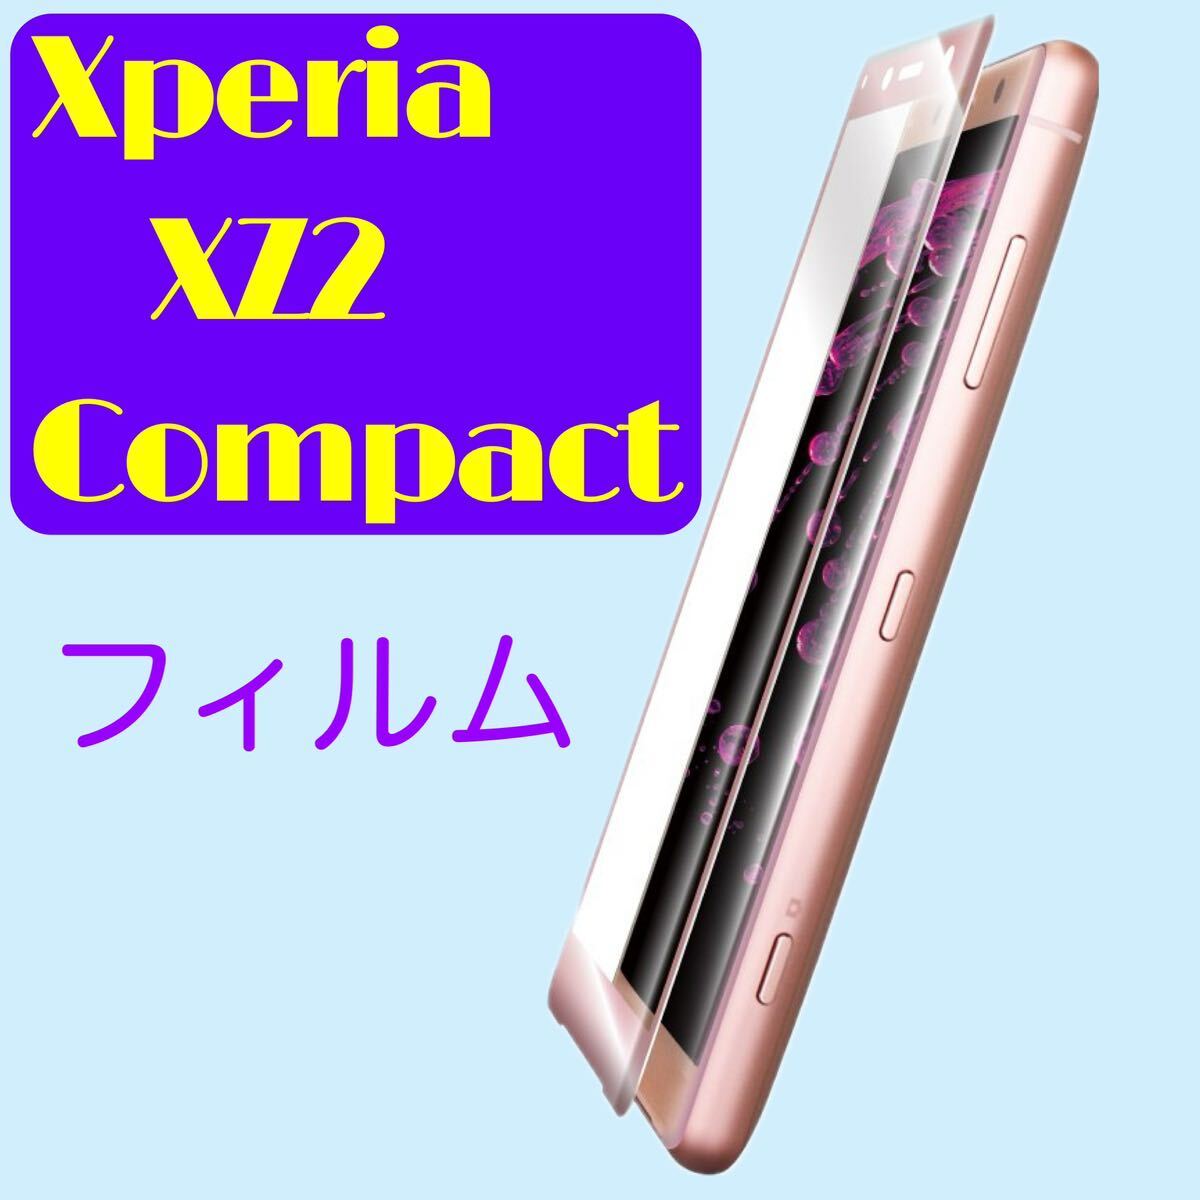 XperiaXZ2 Compact ガラスフィルム ピンクフレーム a2 全画面保護/高光沢/0.20mm LP-XPXC2FGFPK SO-05K _画像1